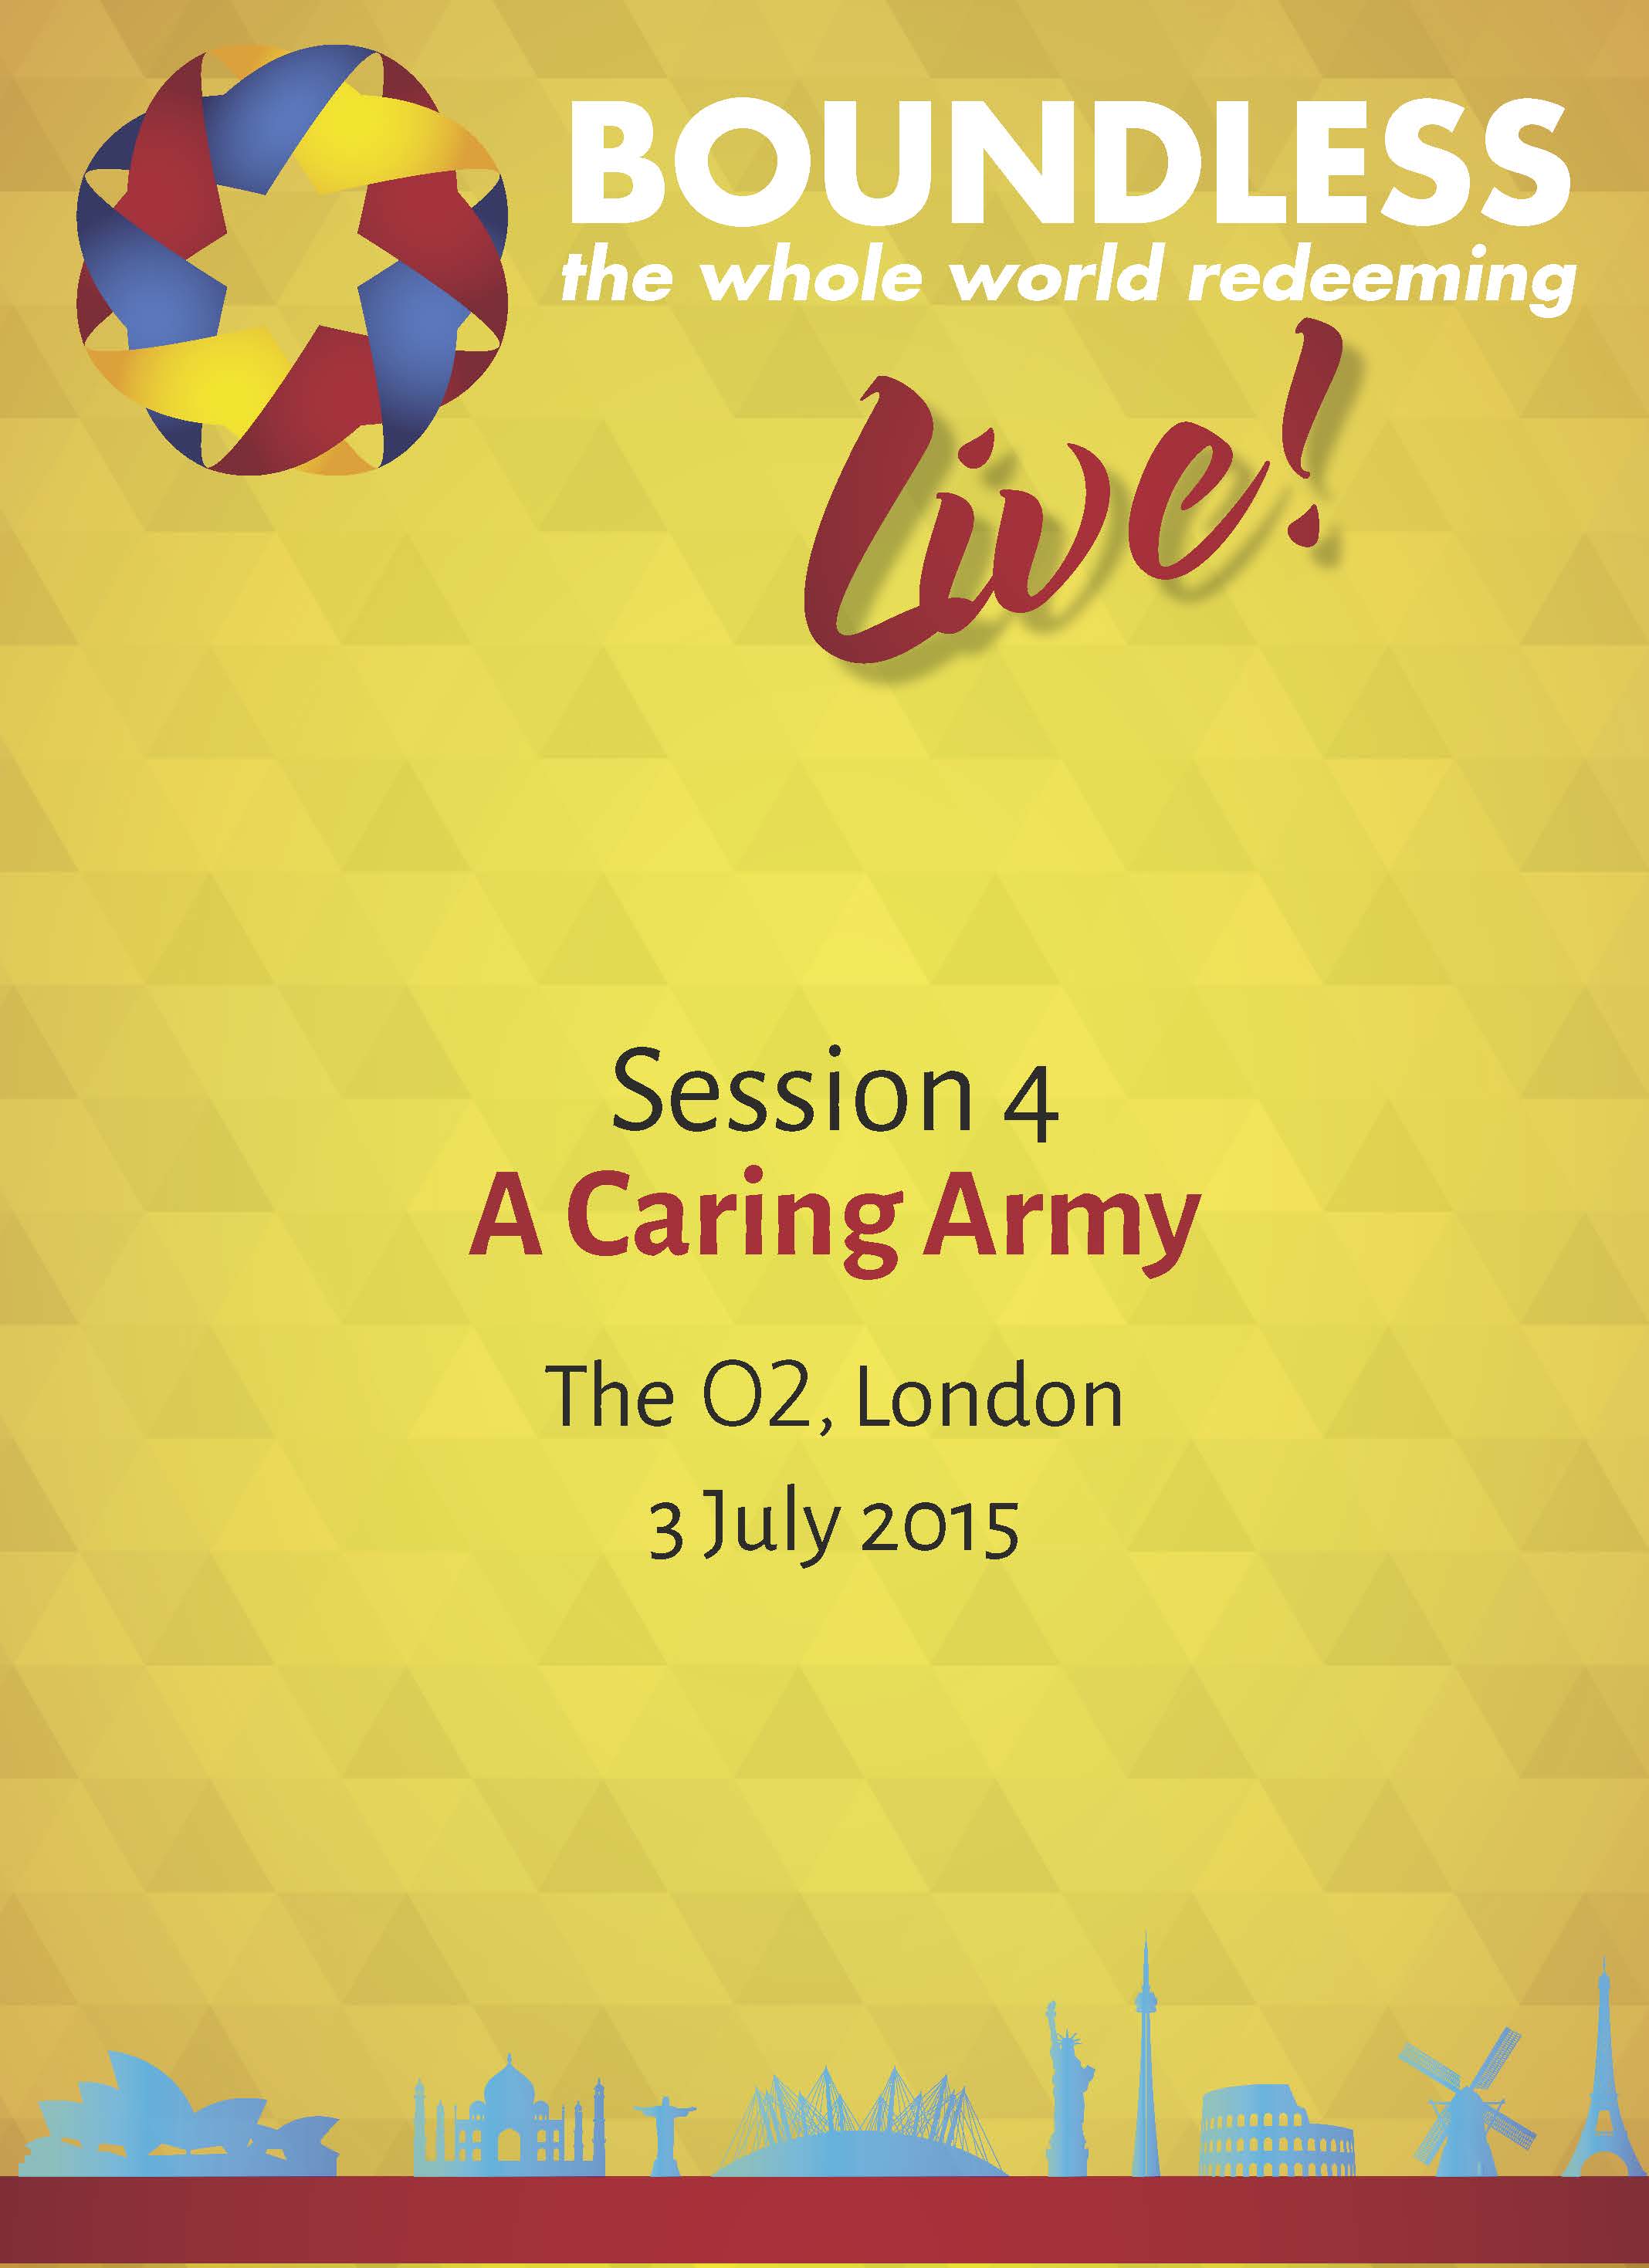 Boundless Live! Session 4 - A Caring Army (Social Justice)